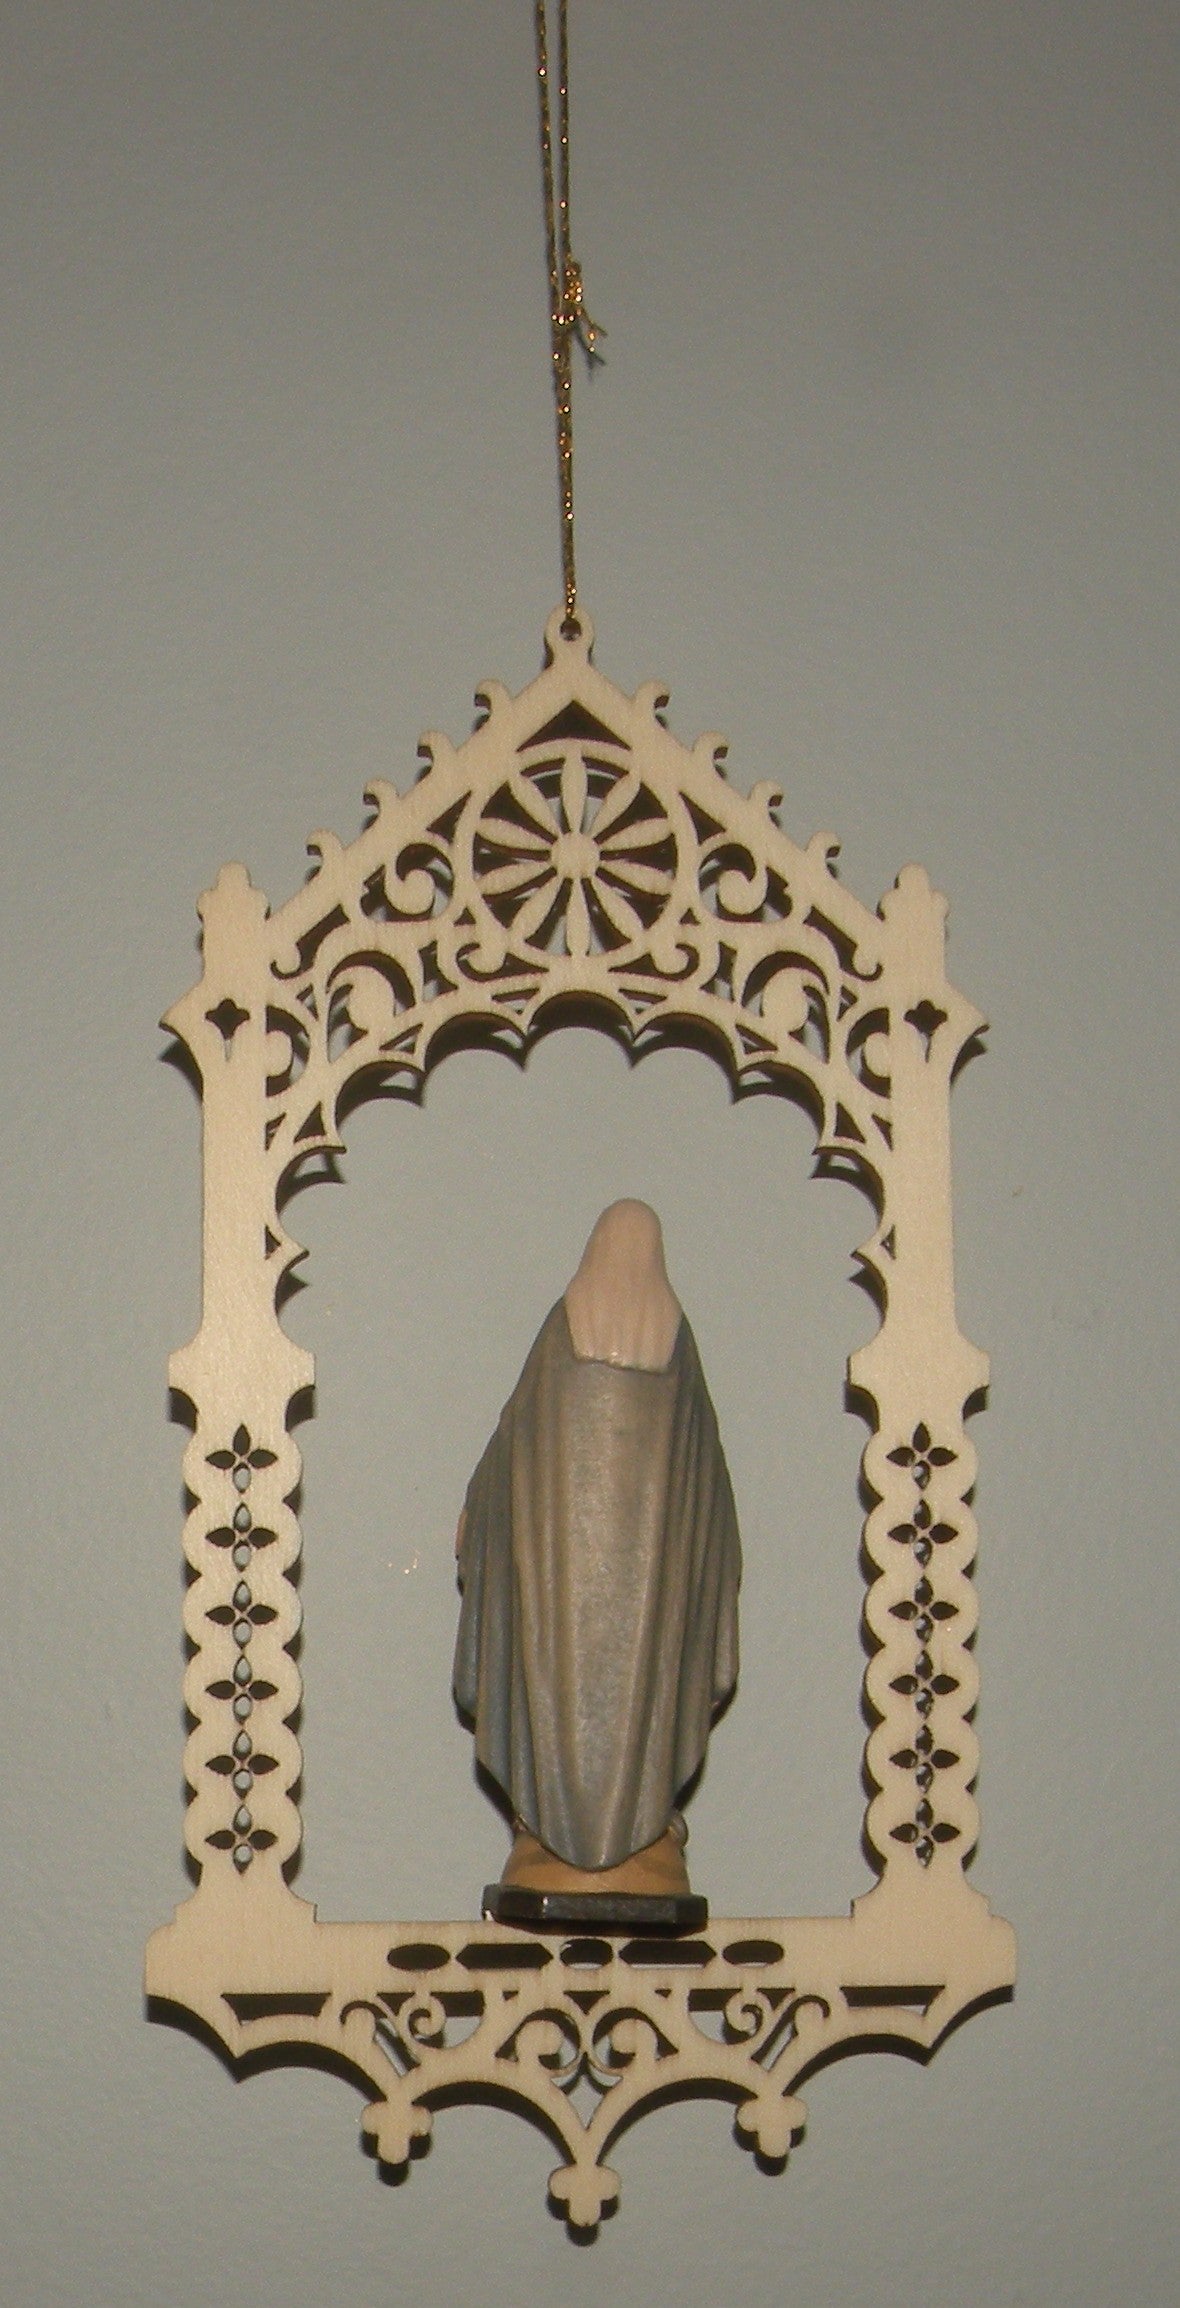 Immaculate of Medjugorje  in niche  - 08364